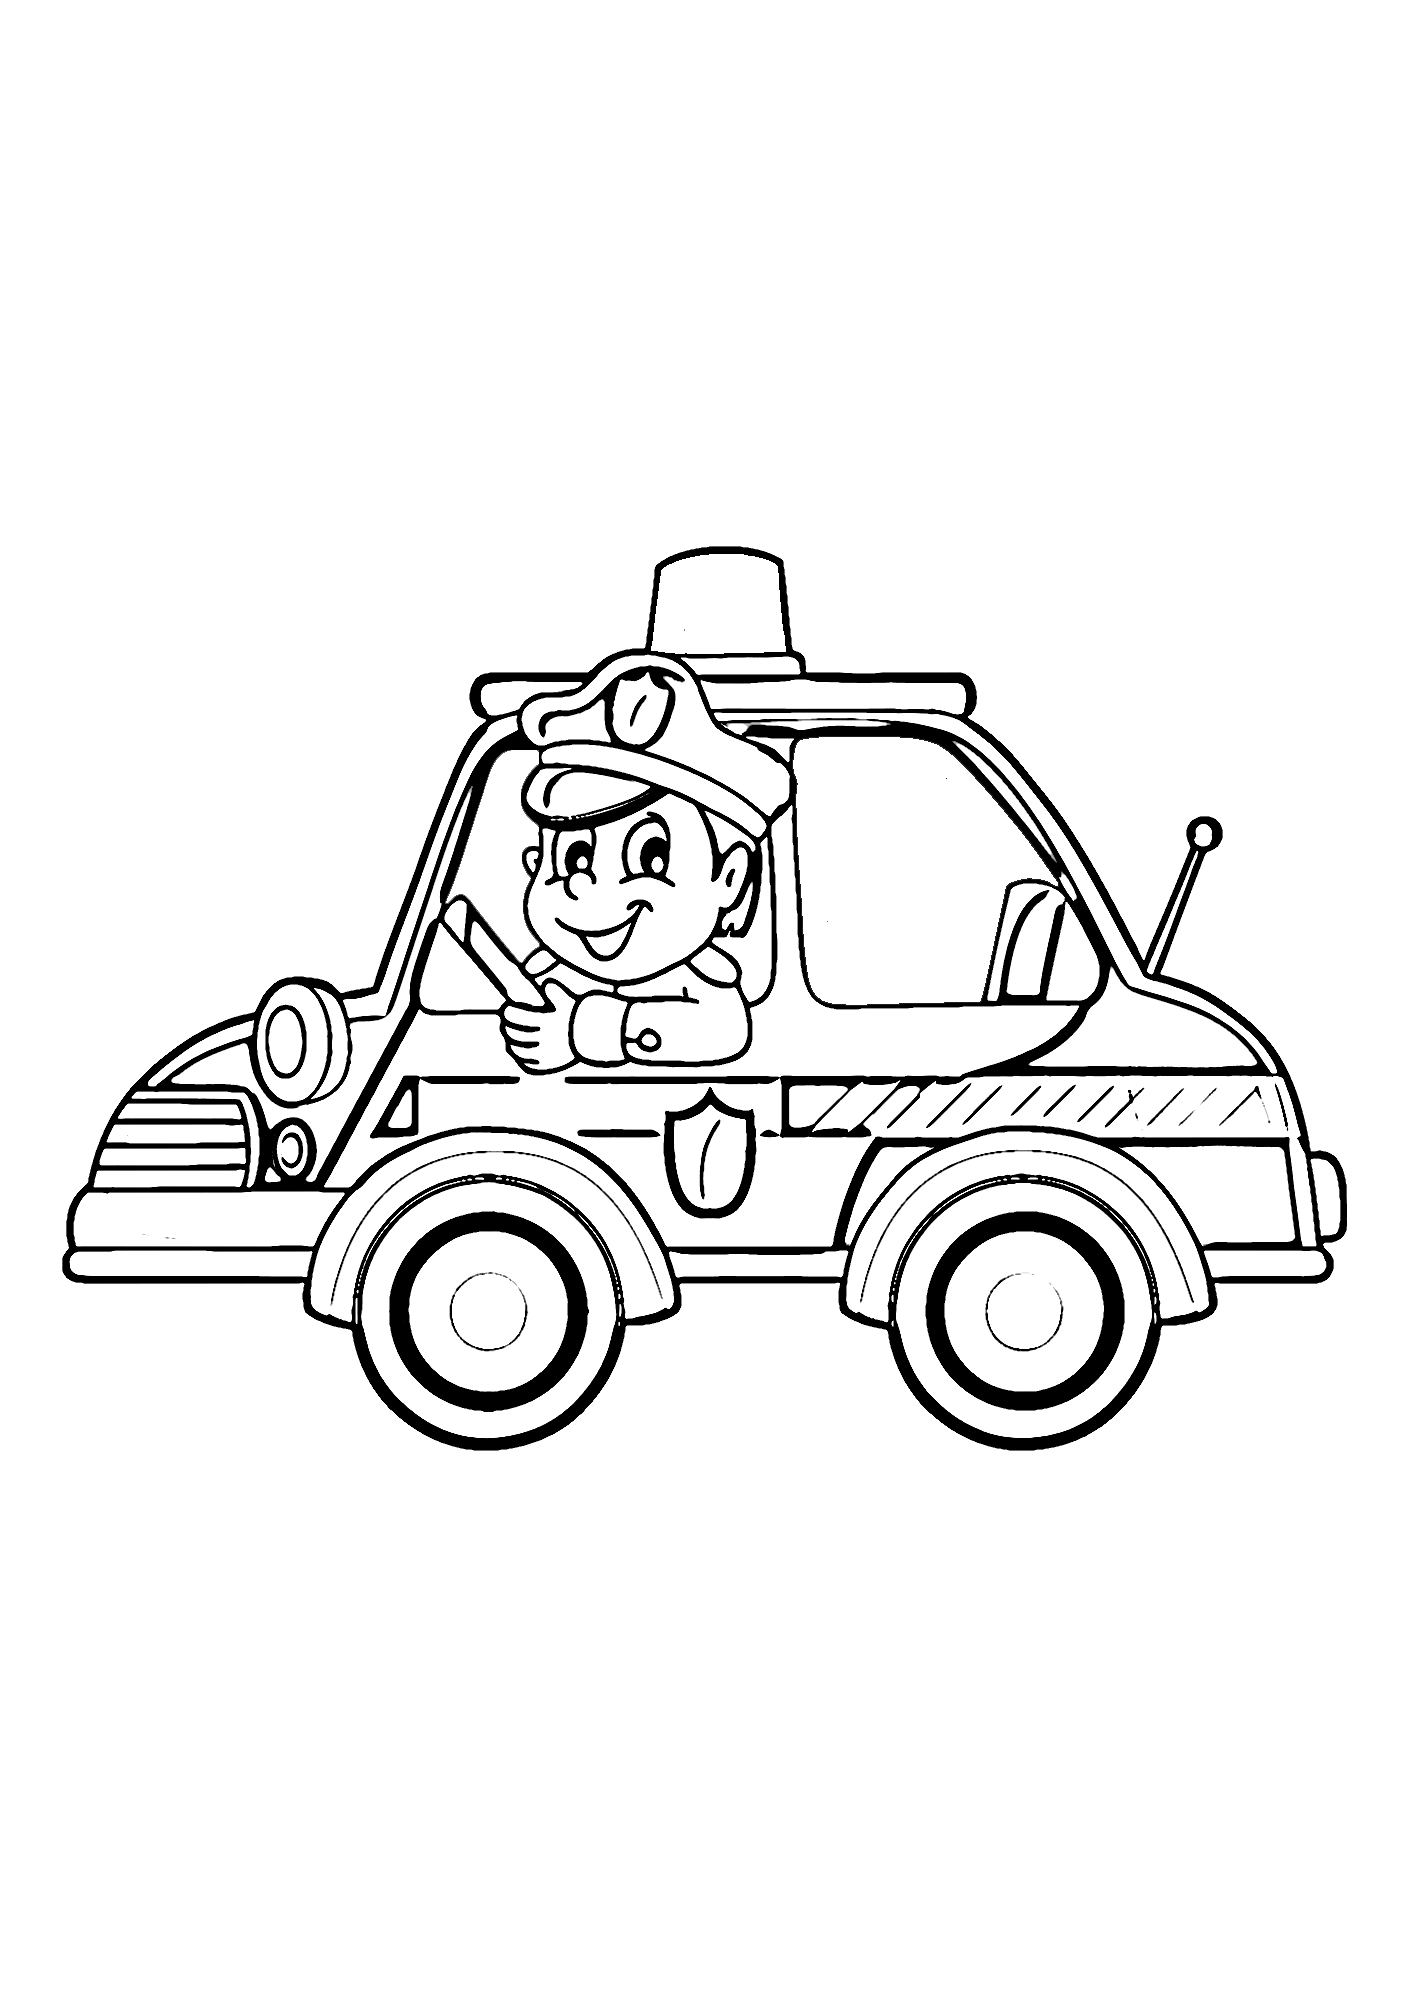 Sweet Police Car Coloring Pages